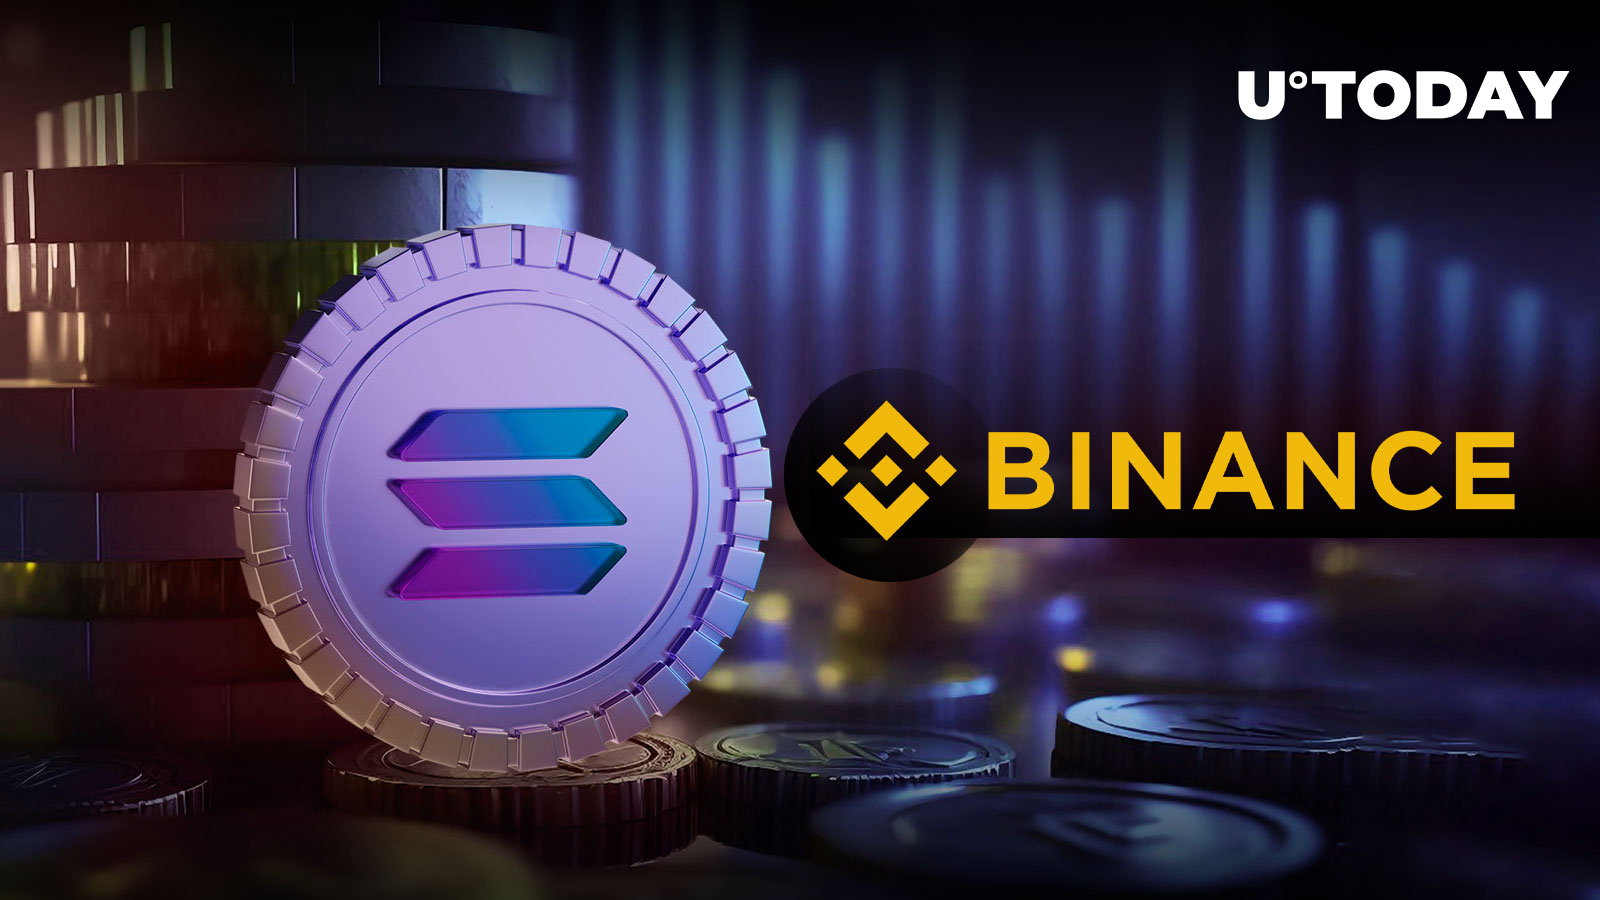 Solana (SOL) Rally Nearing Its End? Wallet Moves  Million to Binance Amid Price Dip